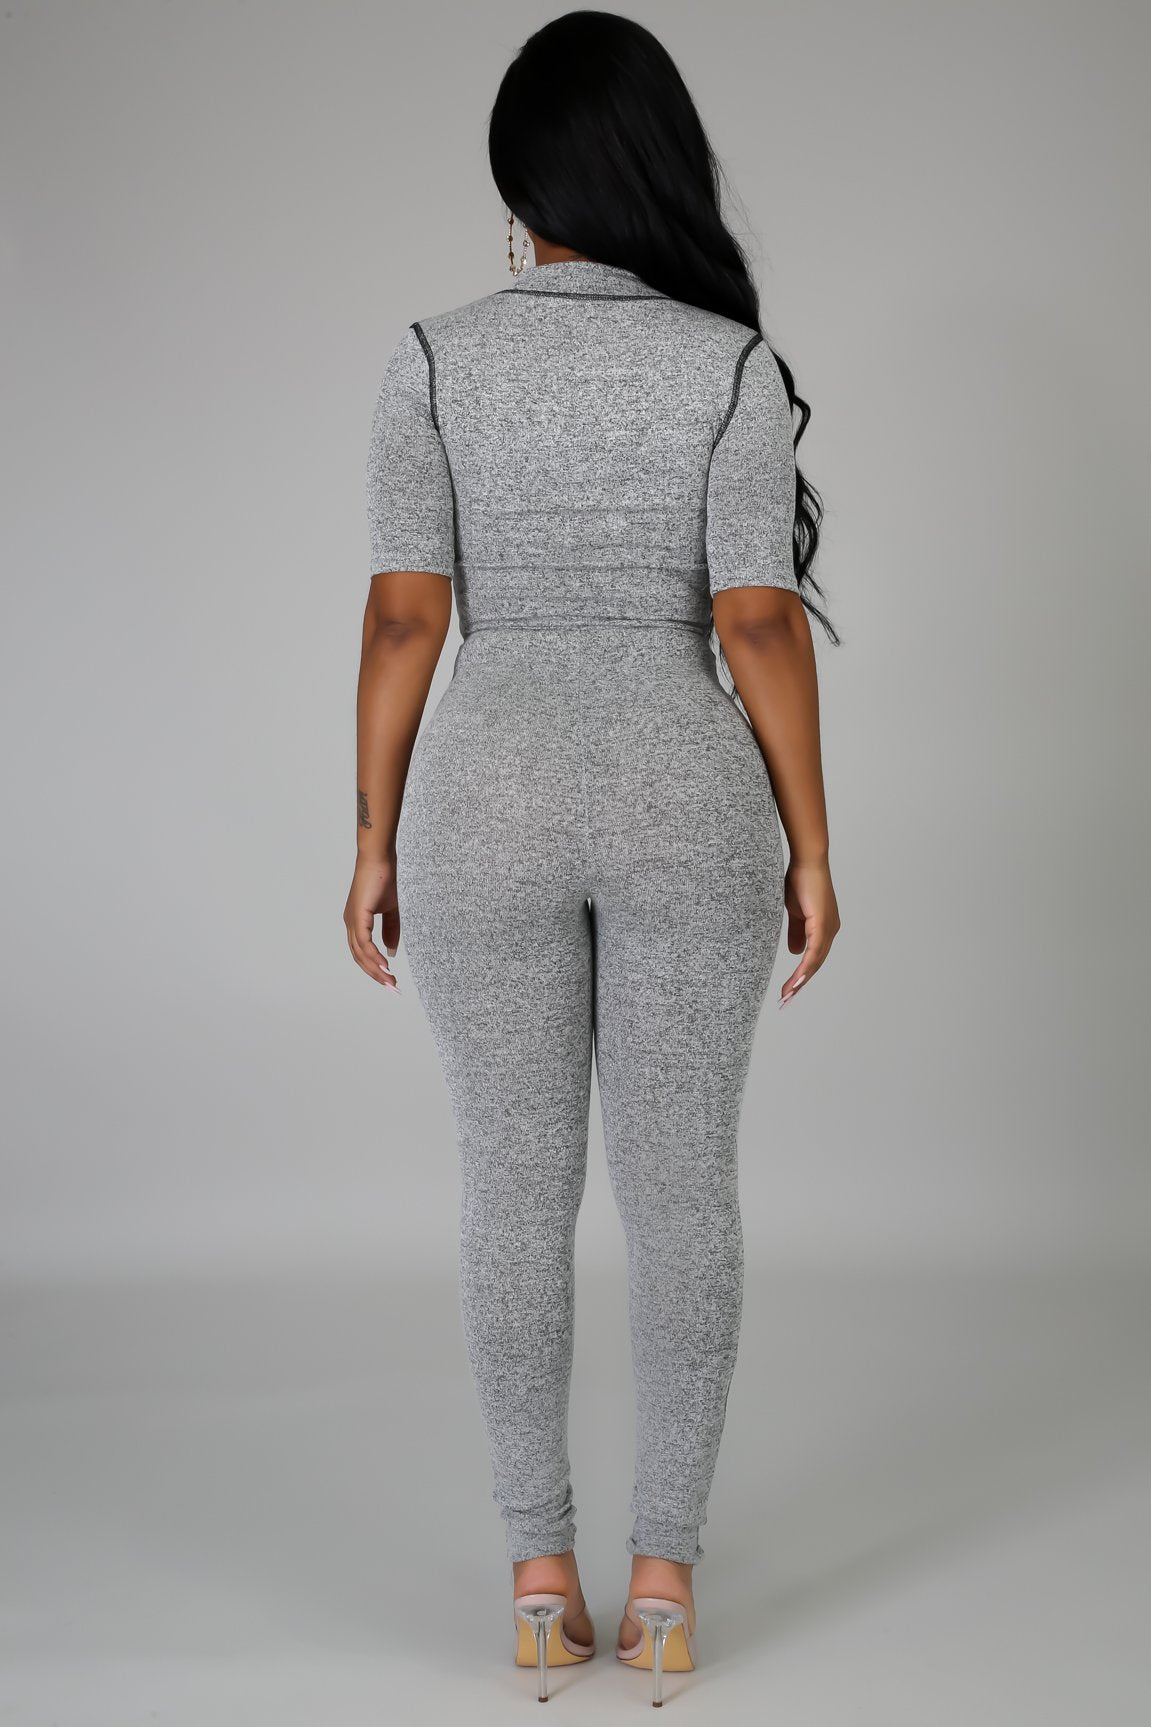 Chill Time Jumpsuit